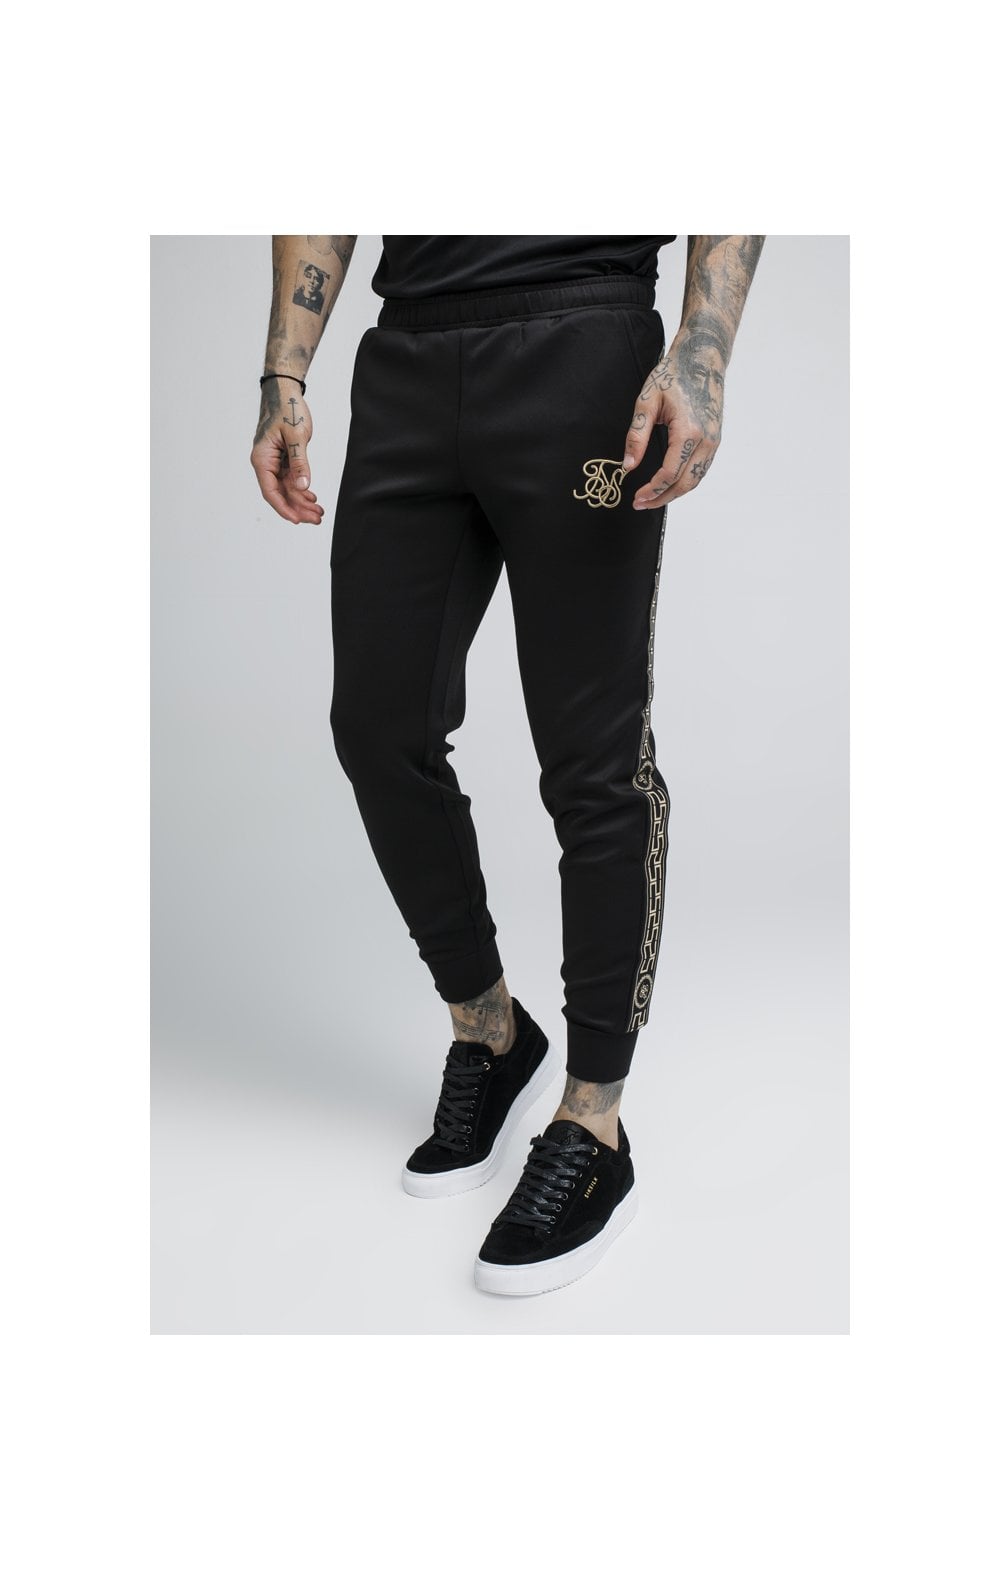 Load image into Gallery viewer, SikSilk Cartel Cropped Cuffed Track Pants - Black